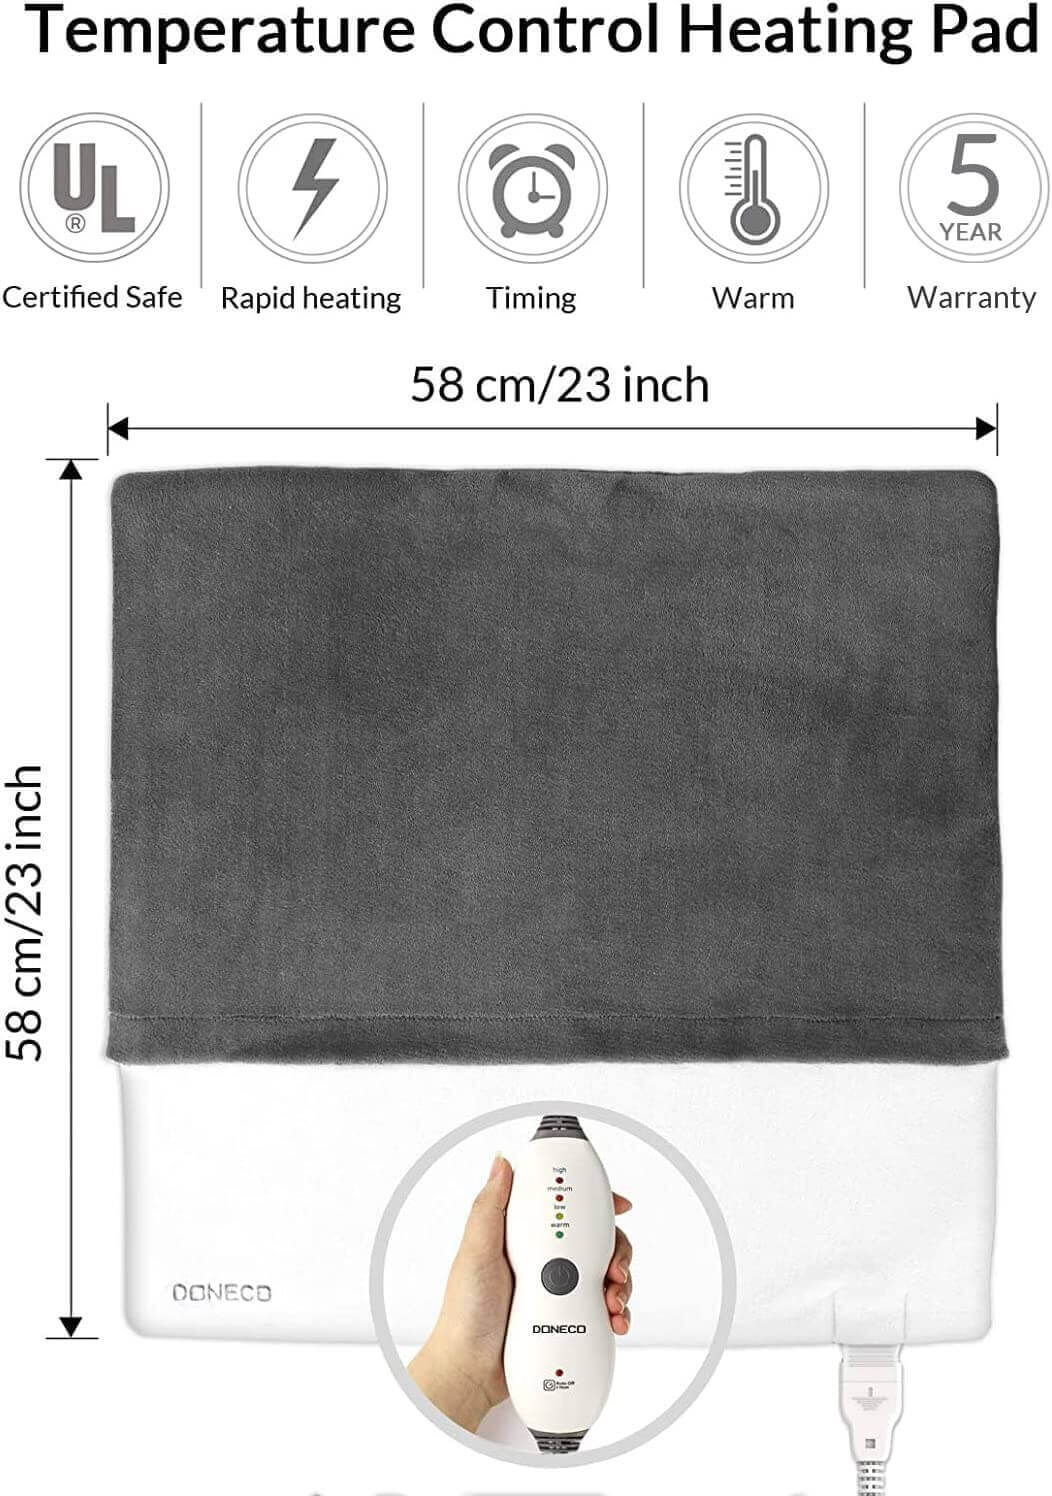 DONECO King Size Heating Pad (22 x 22 in), Electric Foot Warmer with 4 Temperature Settings and Fast-Heating Technology - Temperature Control Heating Pad